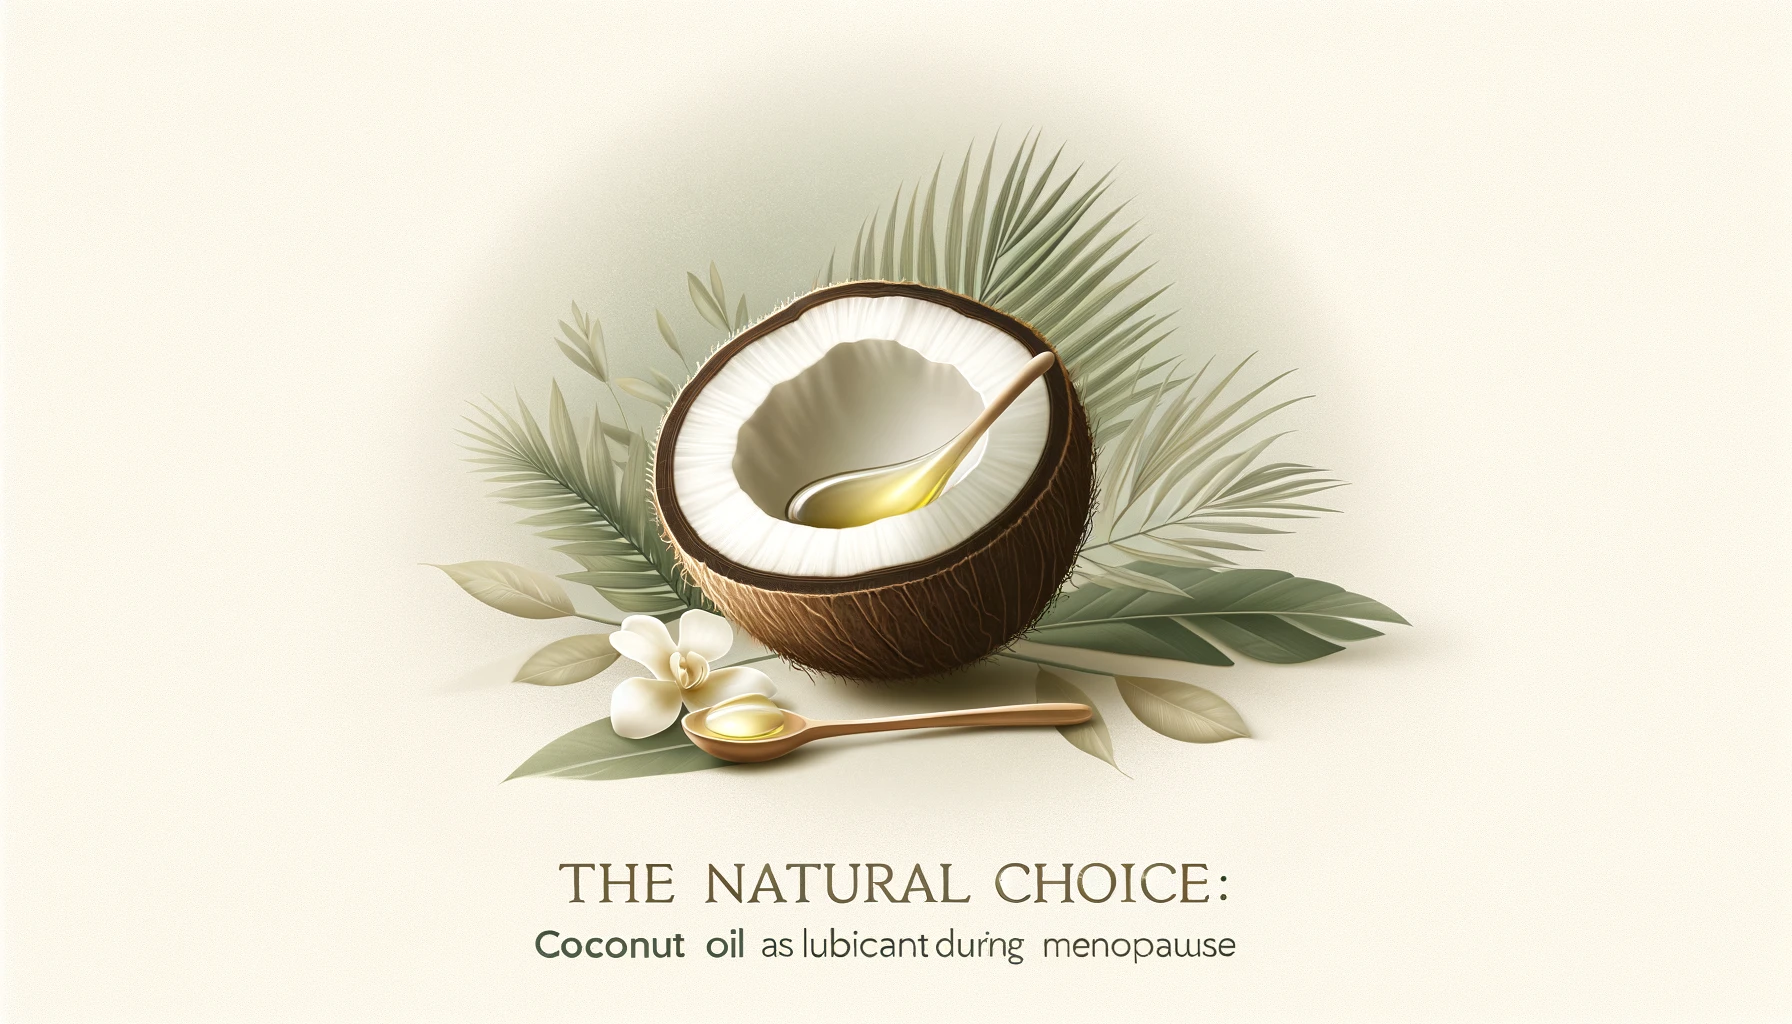 blog featured image for the post about using coconut oil as a lubricant during menopause